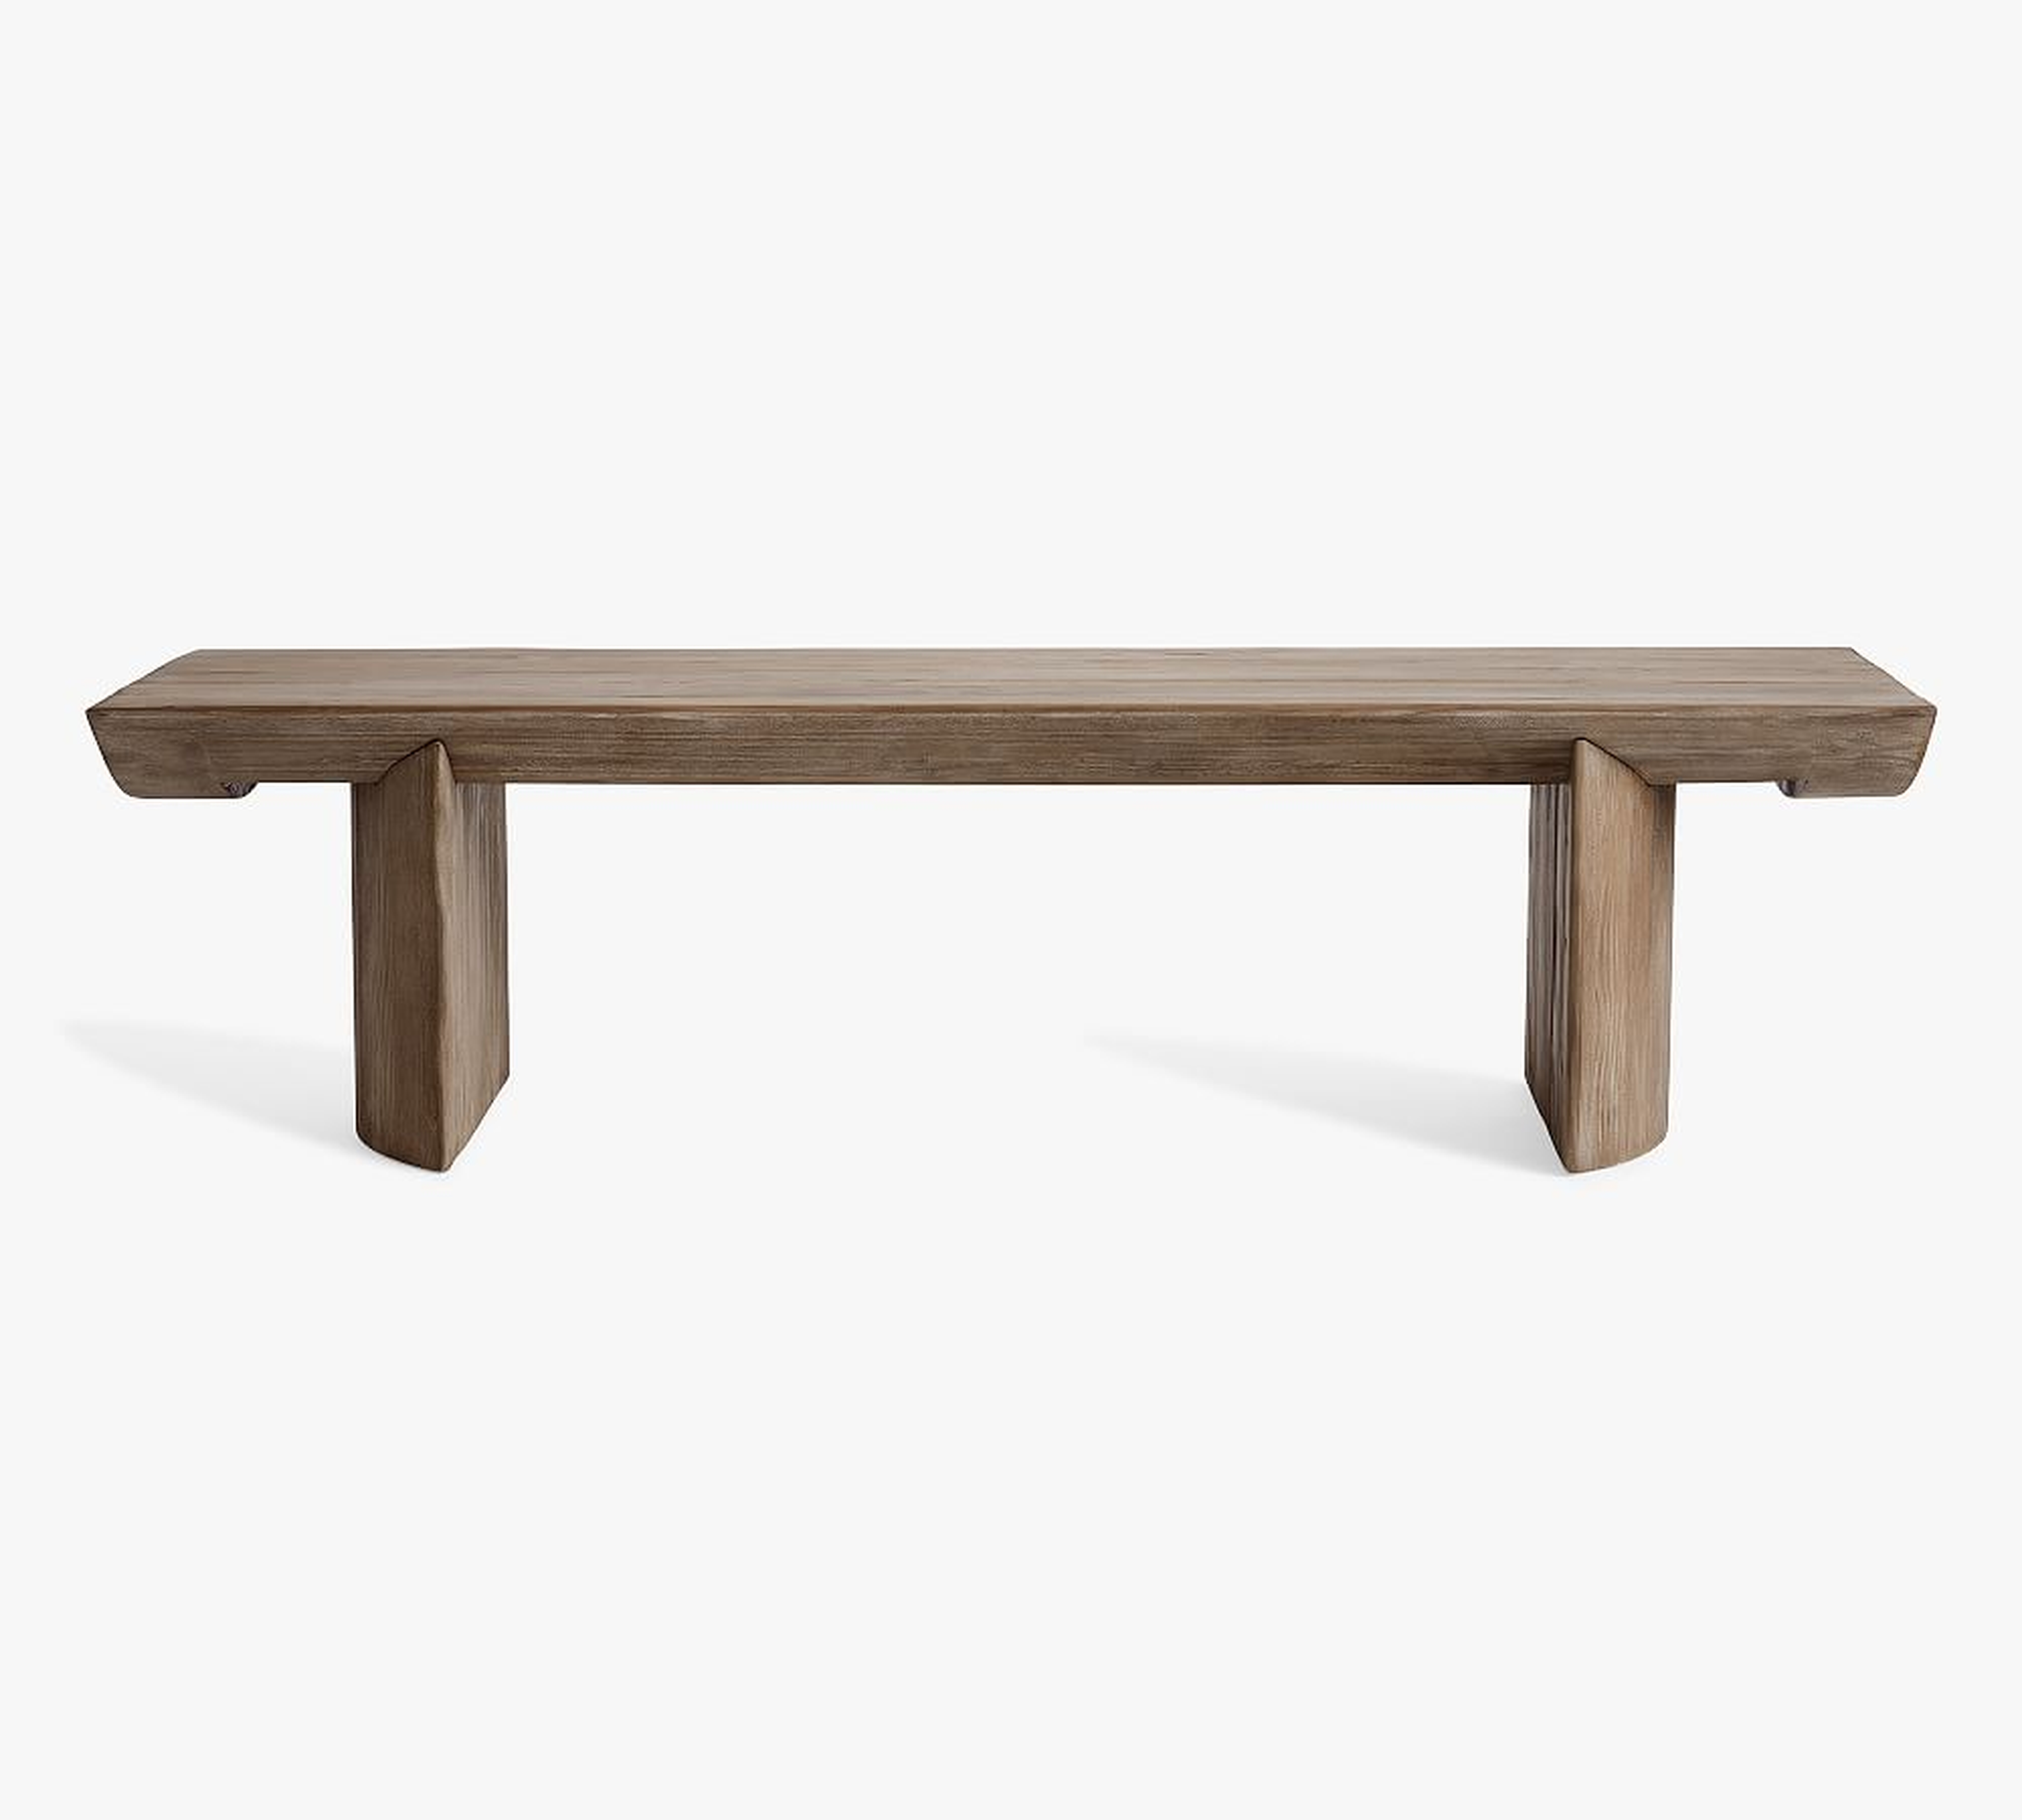 Pismo 65" Reclaimed Wood Coffee Table, Rustic Warm Gray - Pottery Barn